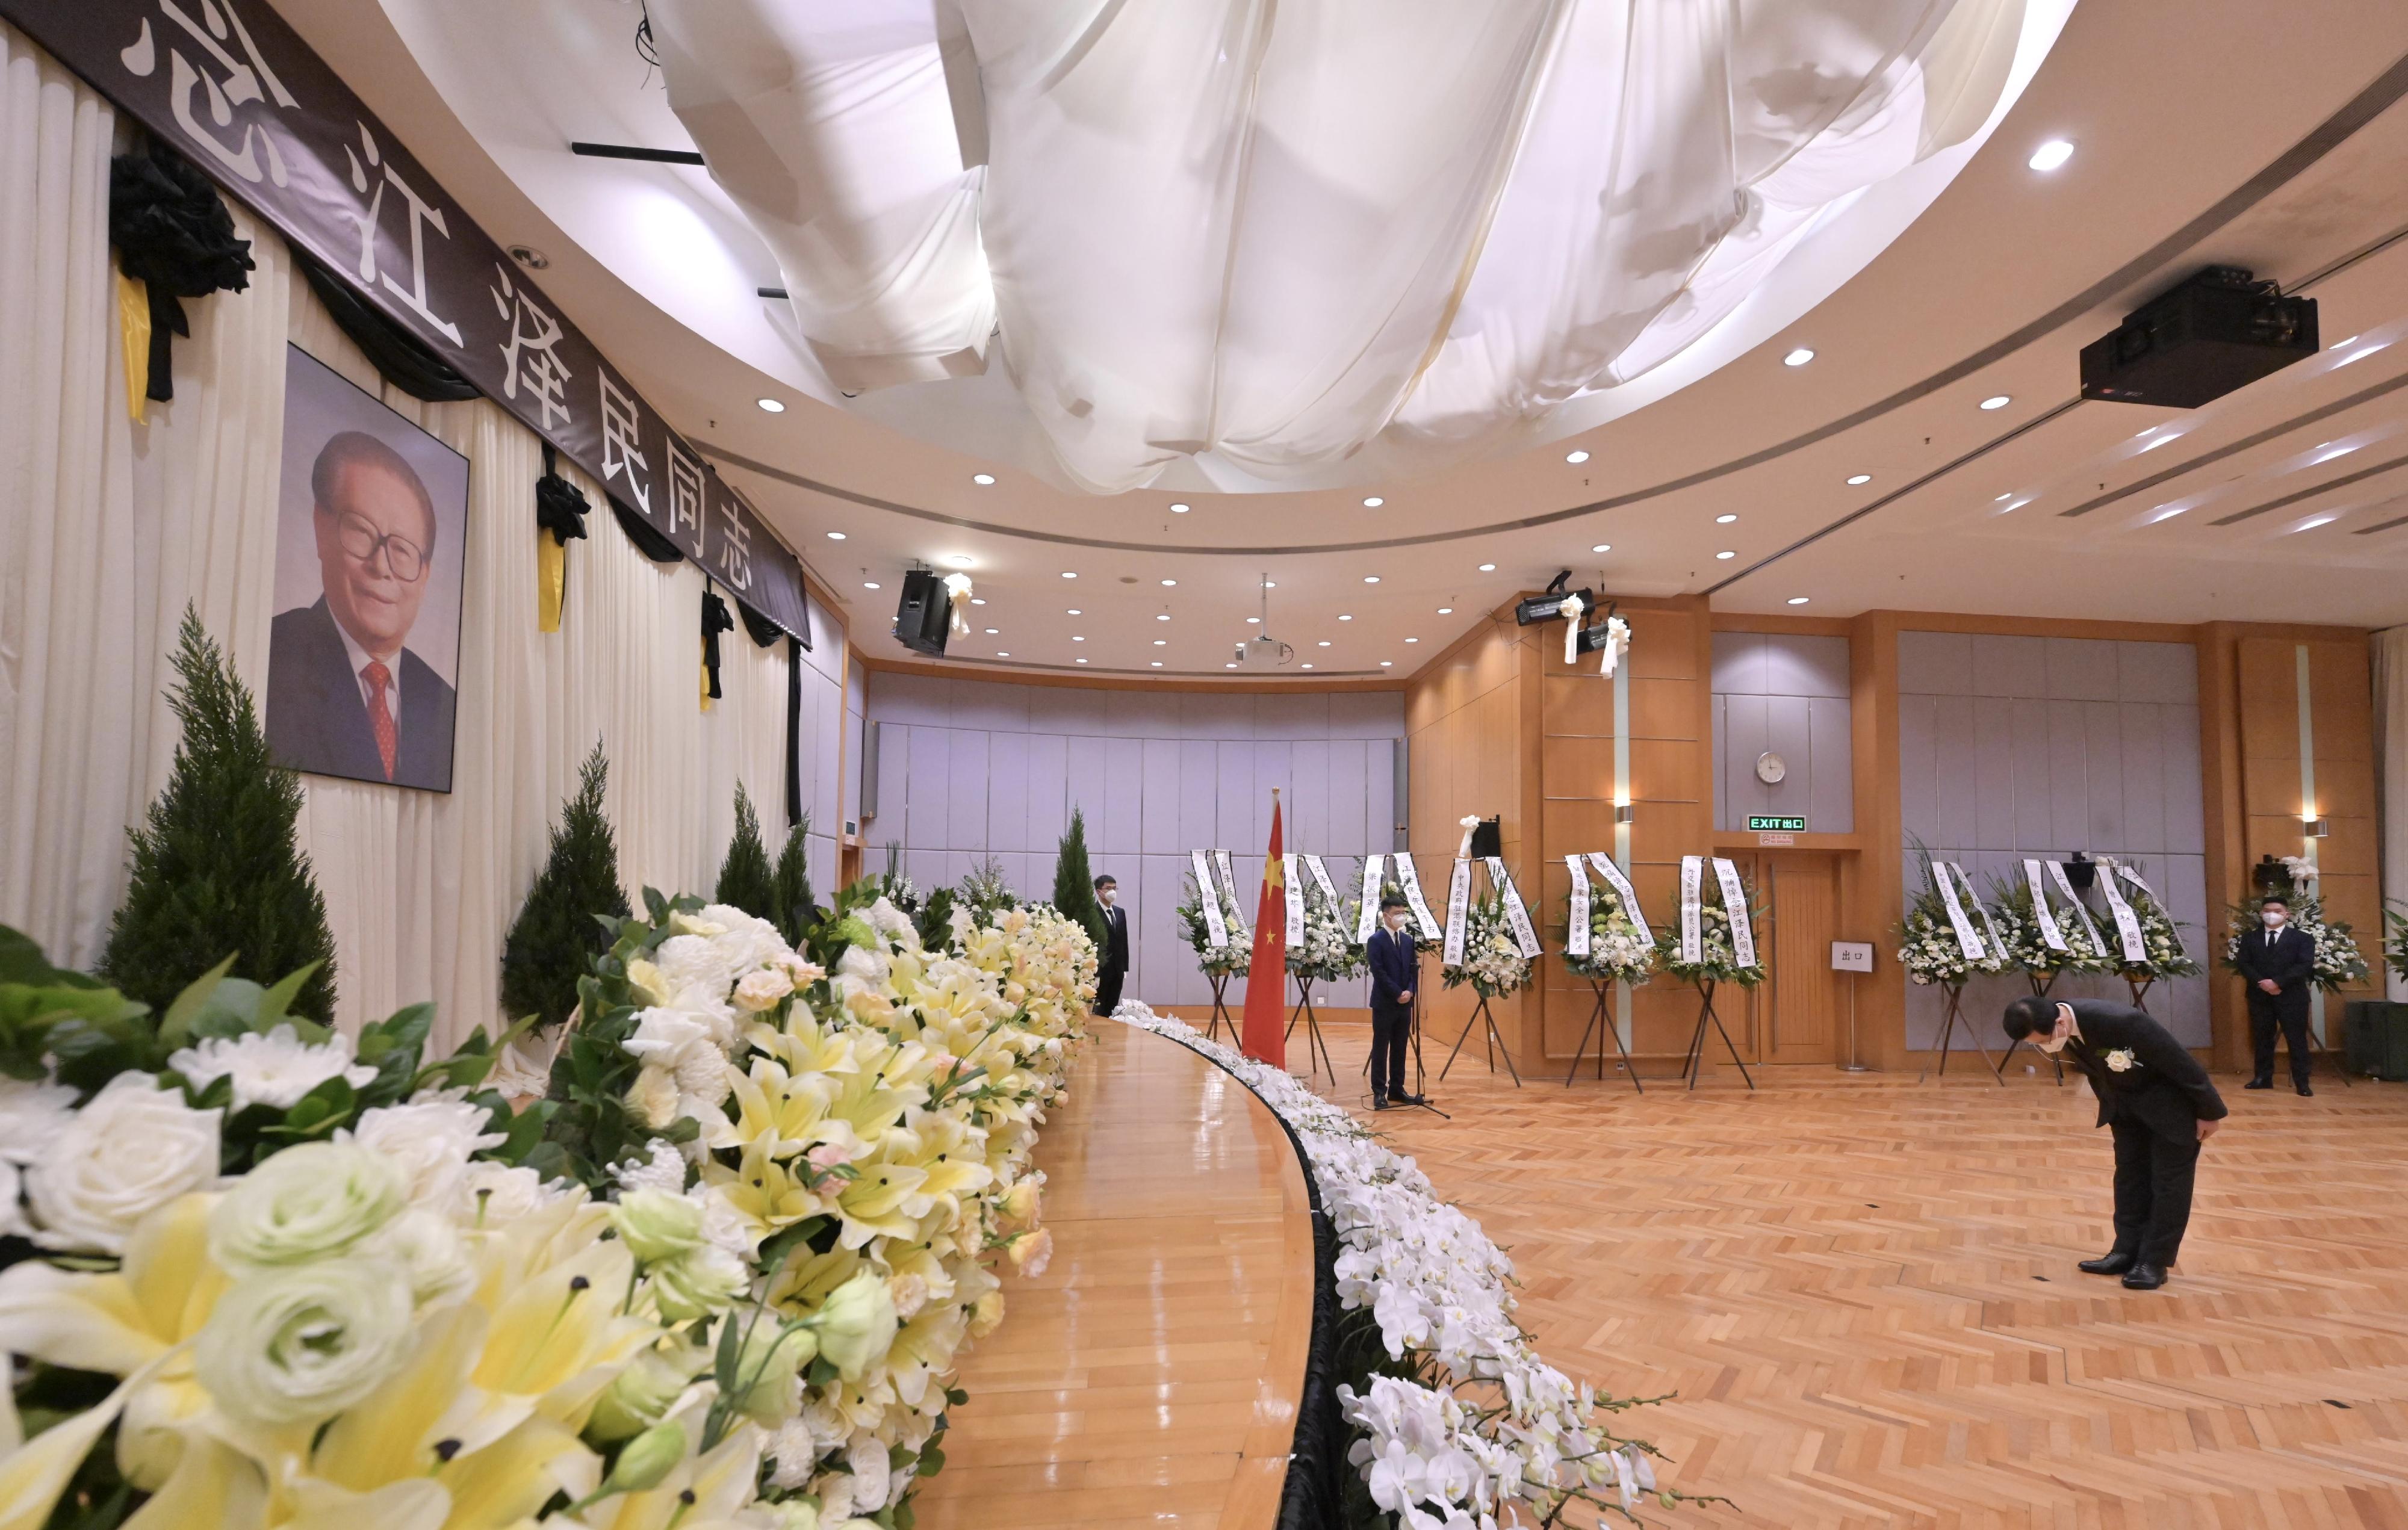 The Liaison Office of the Central People's Government in the Hong Kong Special Administrative Region (HKSAR) set up a mourning hall inside its office building for the late Former President of the People's Republic of China, Mr Jiang Zemin. Photo shows the Chief Executive, Mr John Lee, today (December 1) visiting the mourning hall to send condolences and express profound respect for President Jiang on behalf of the HKSAR.